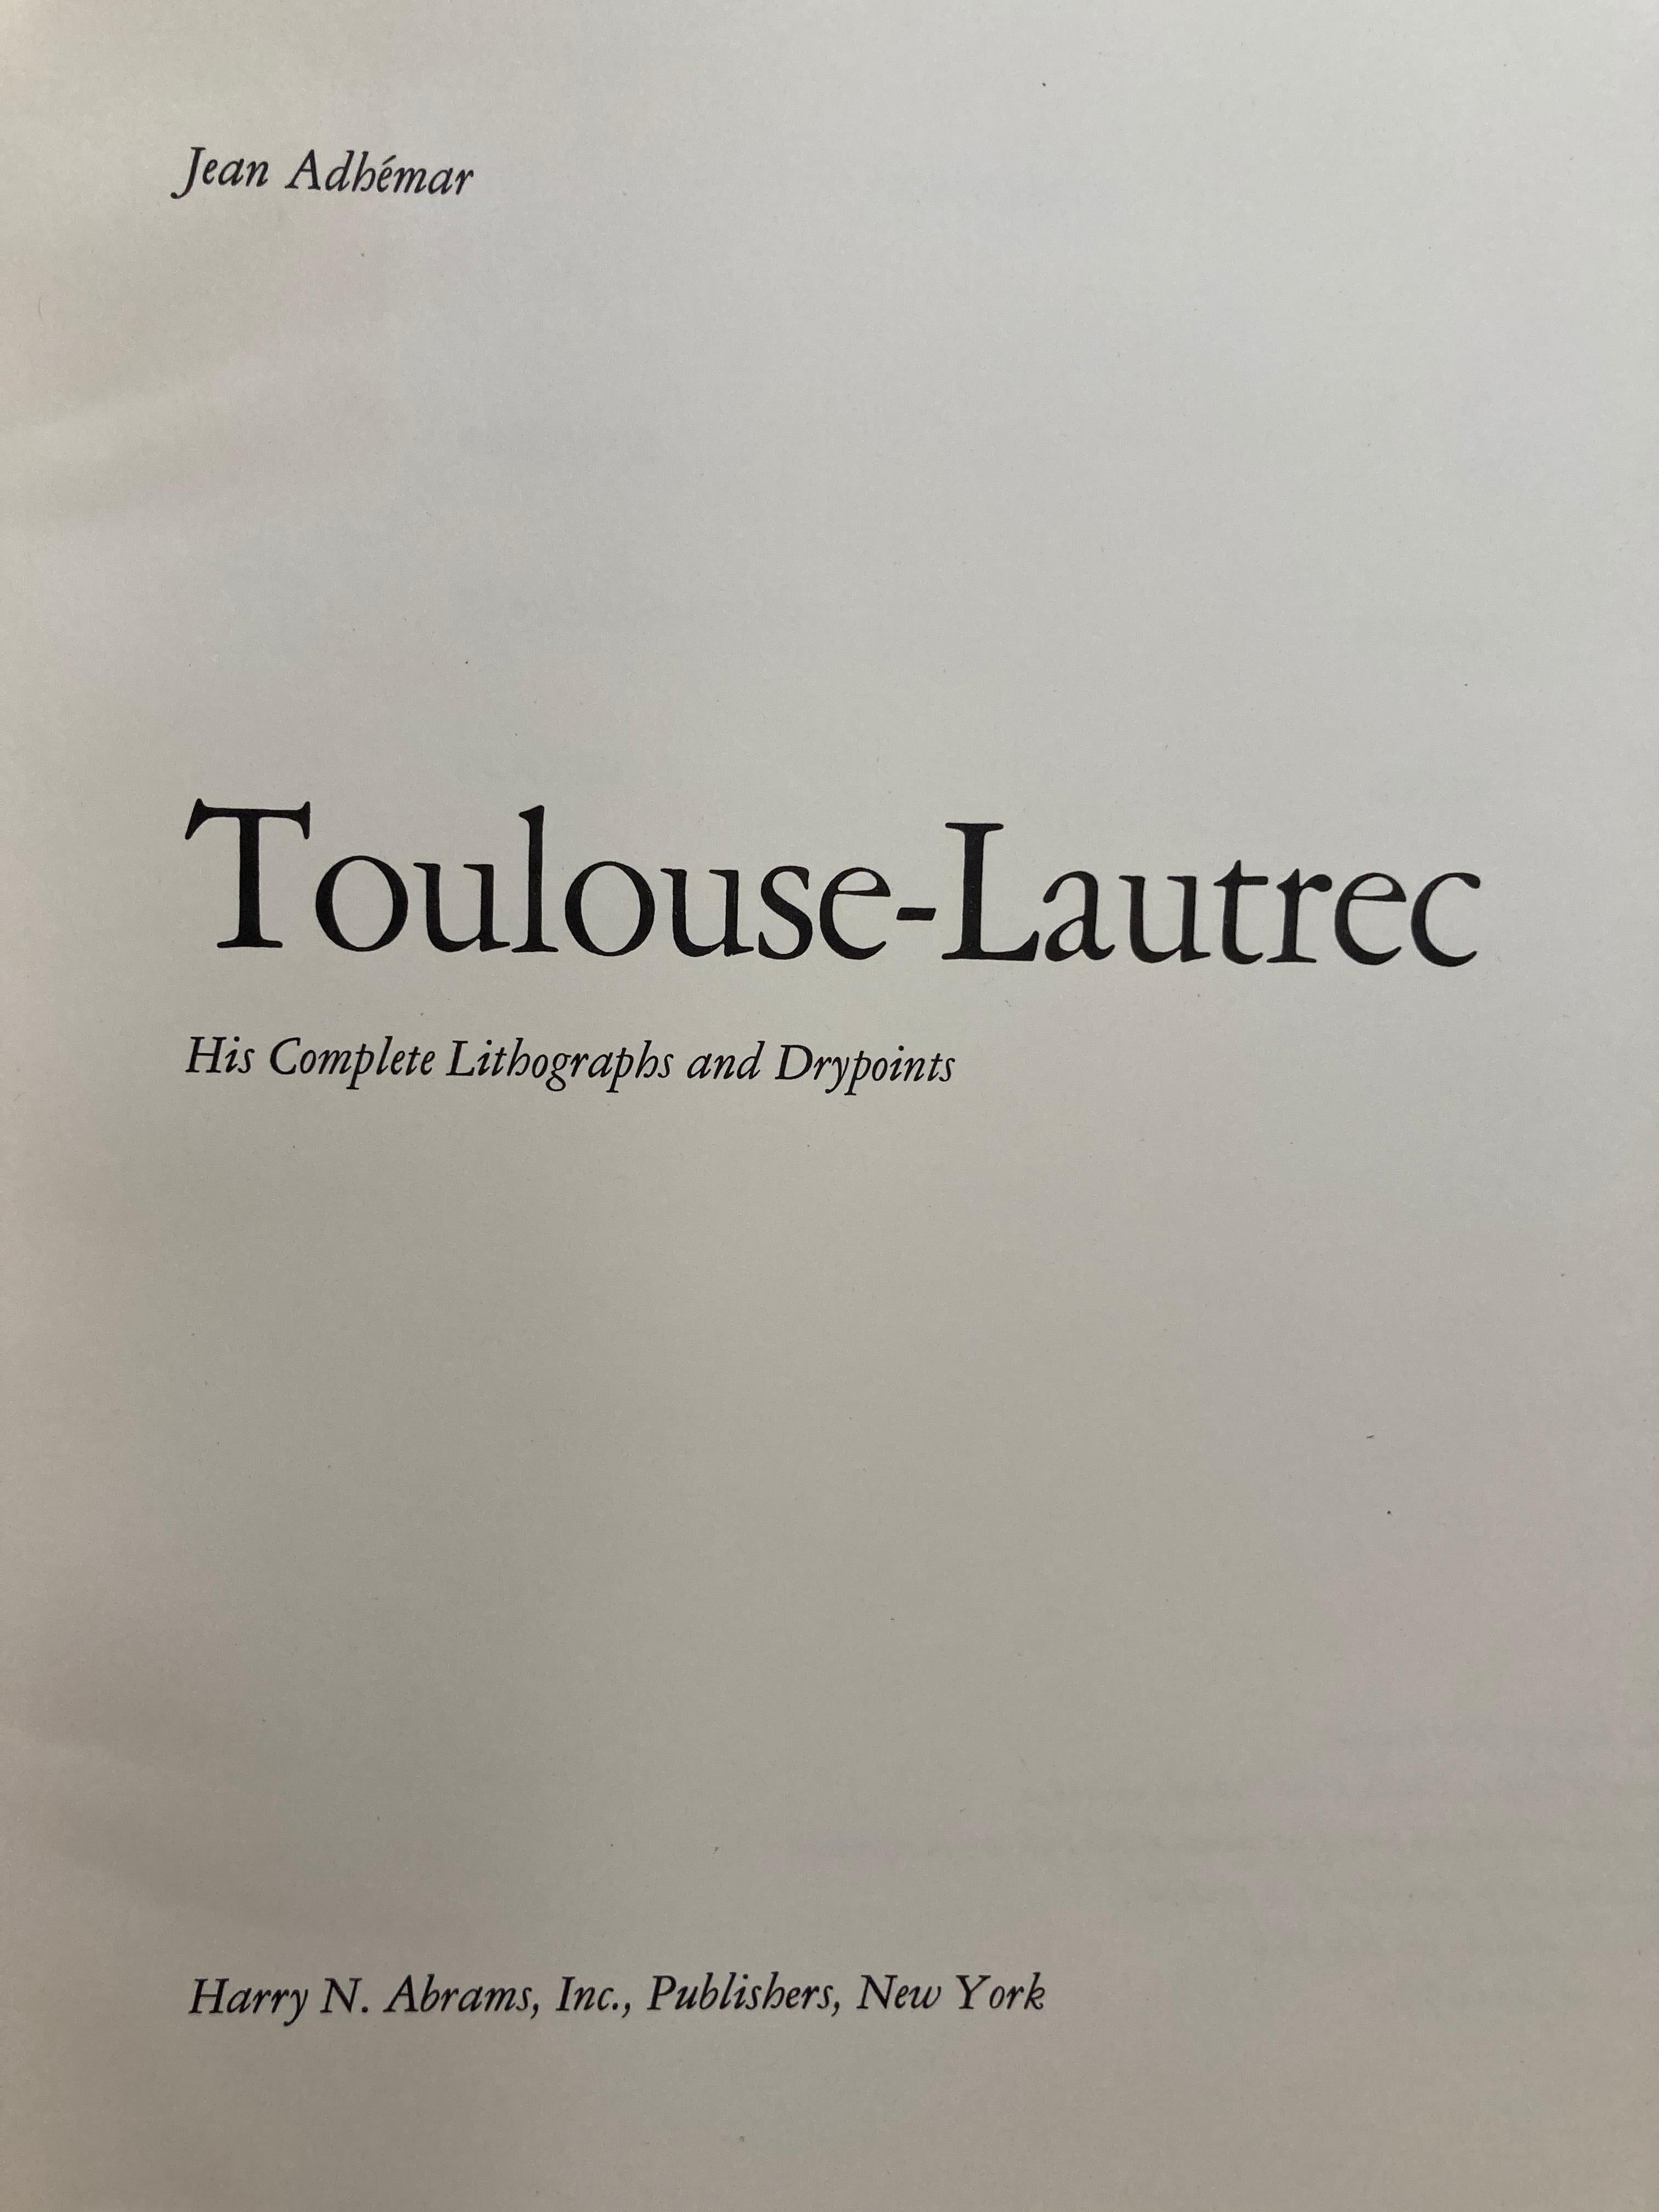 Paper Toulouse-Lautrec, Complete Lithographs and Drypoints by Adhémar, Jean